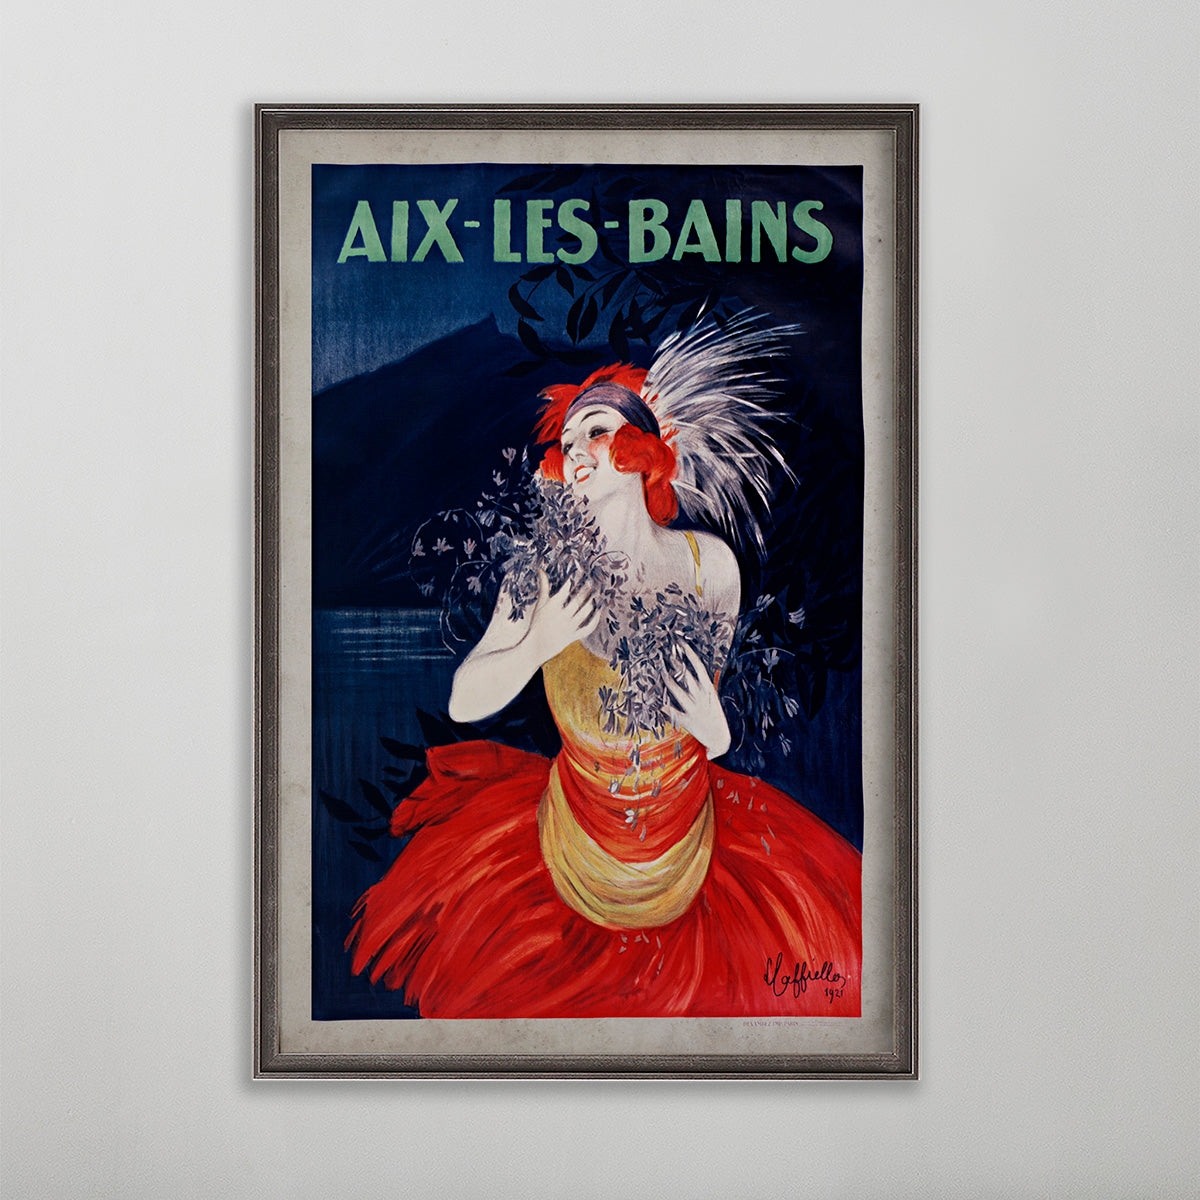 old poster advertisement art. aix les bains poster wall art by leonetto cappiello. Girl in red dress holding absinthe bottle on a poster vintage art.